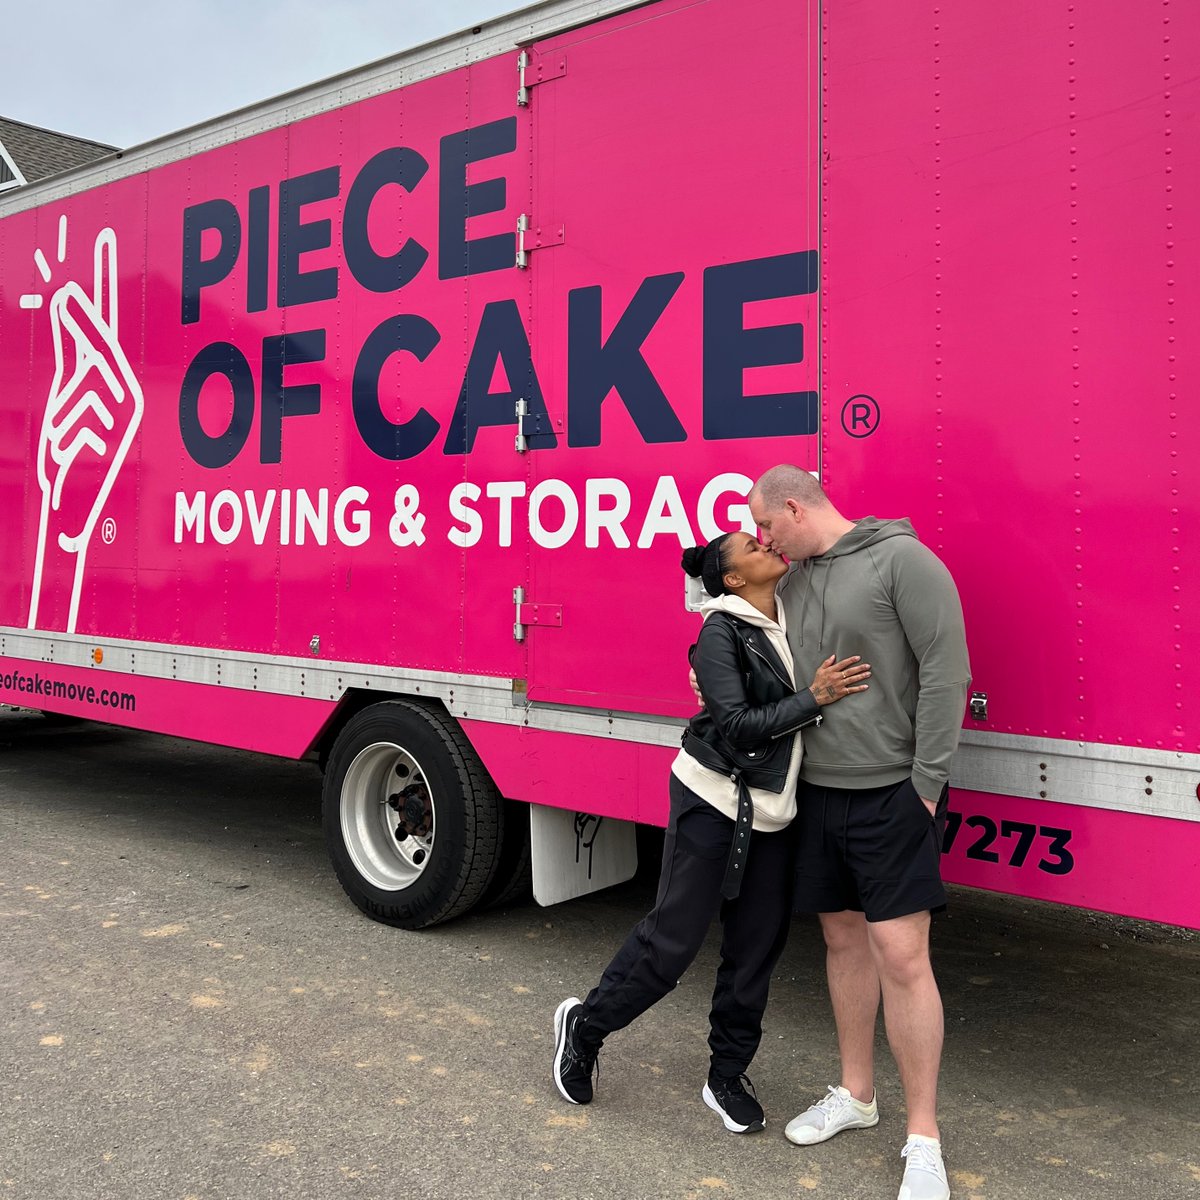 Enjoy your moving day with everyone's favorite mover 💕 @dejariley

#customerreview #customertestimonial #moving #movingtips #movingnyc #nycmovers #mypieceofcakemove #whitegloveservice #localmovers #nyc #pieceofcakemoving #storagenyc #nycmovingcompany